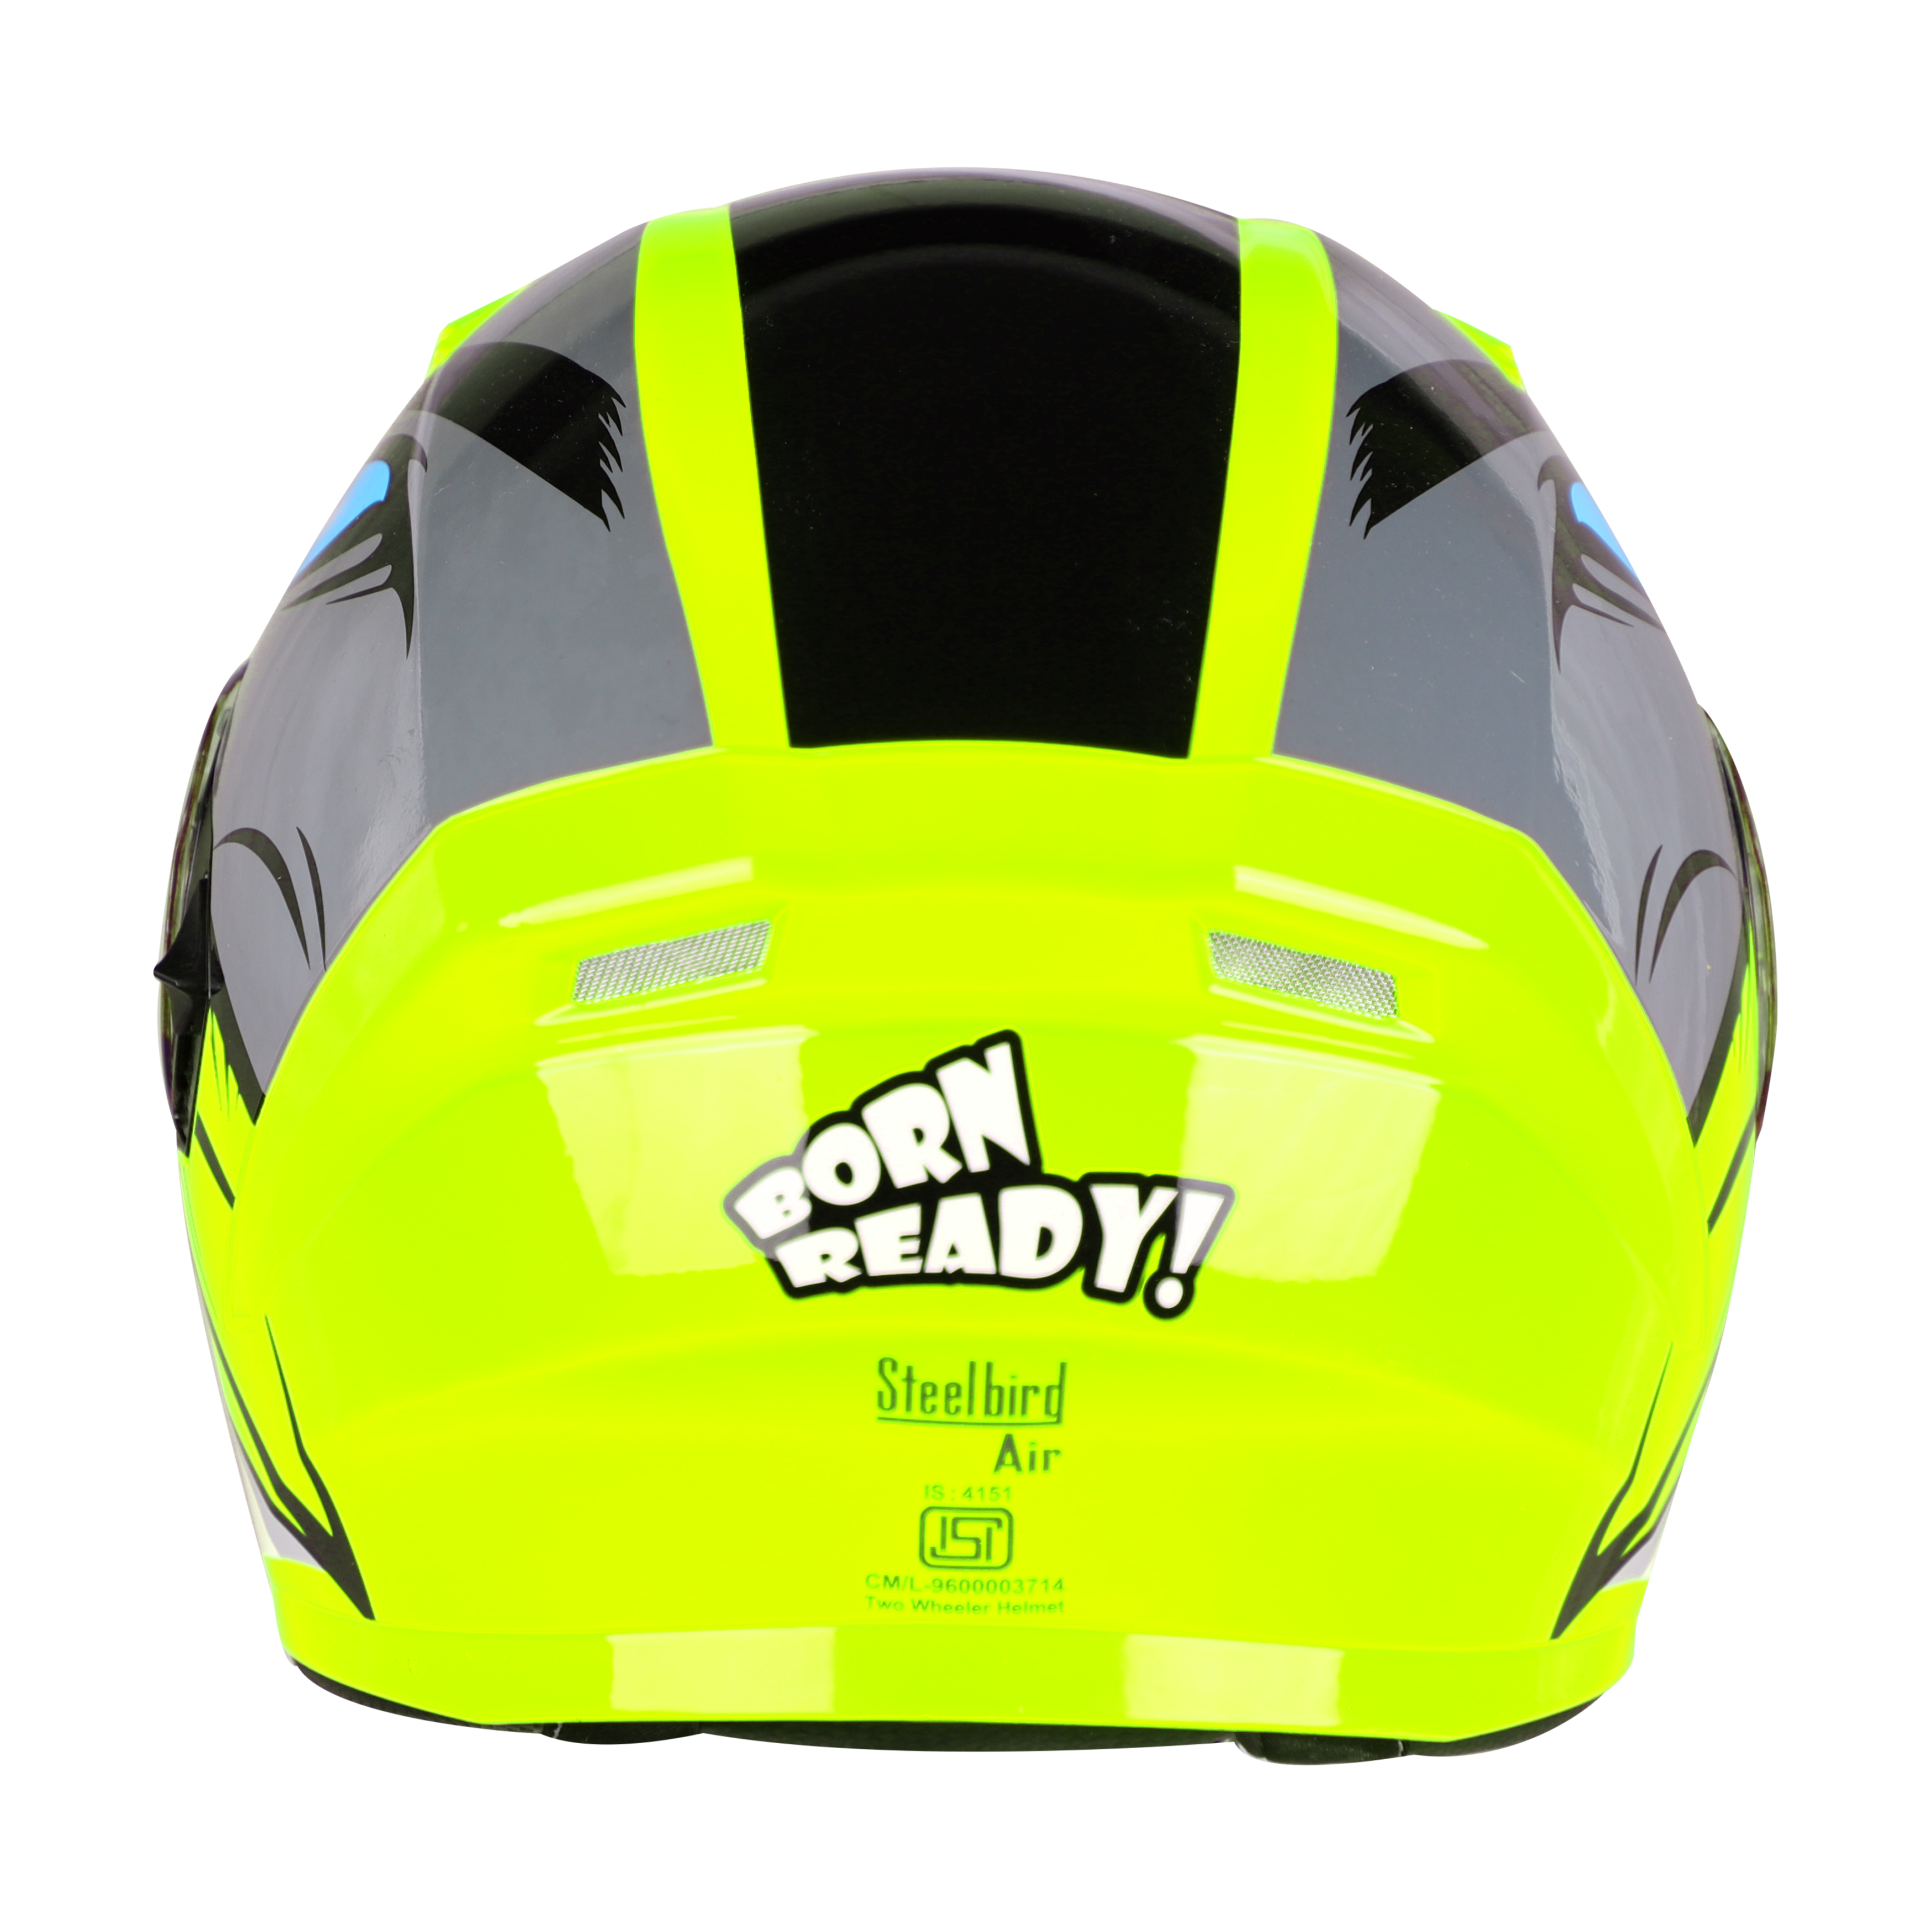 SBA-21 BORN READY GLOSSY FLUO NEON WITH LONG CHEEK PAD INTERIOR (WITH INNER SUN SHIELD) 